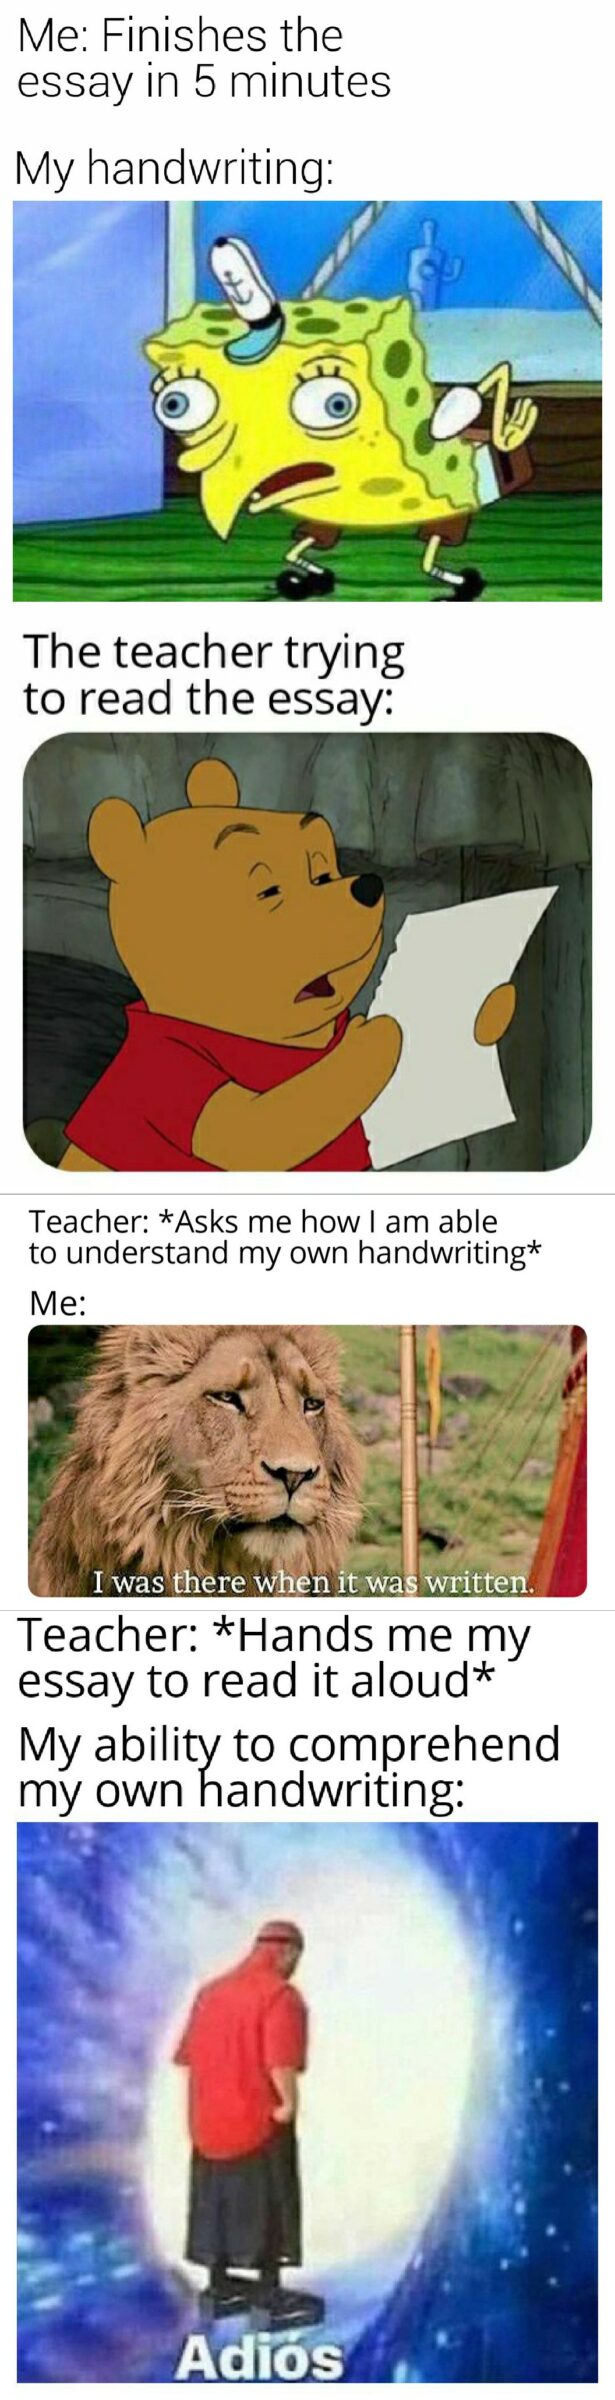 Funny, Teacher, Jk other memes Funny, Teacher, Jk text: Me: Finishes the essay in 5 minutes My handwriting: The teacher trying to read the essay: Teacher: *Asks me how I am able to understand my own handwriting* Teacher: *Hands me my essay to read it aloud* My ability to comprehend my own handwriting: Ad/0S 